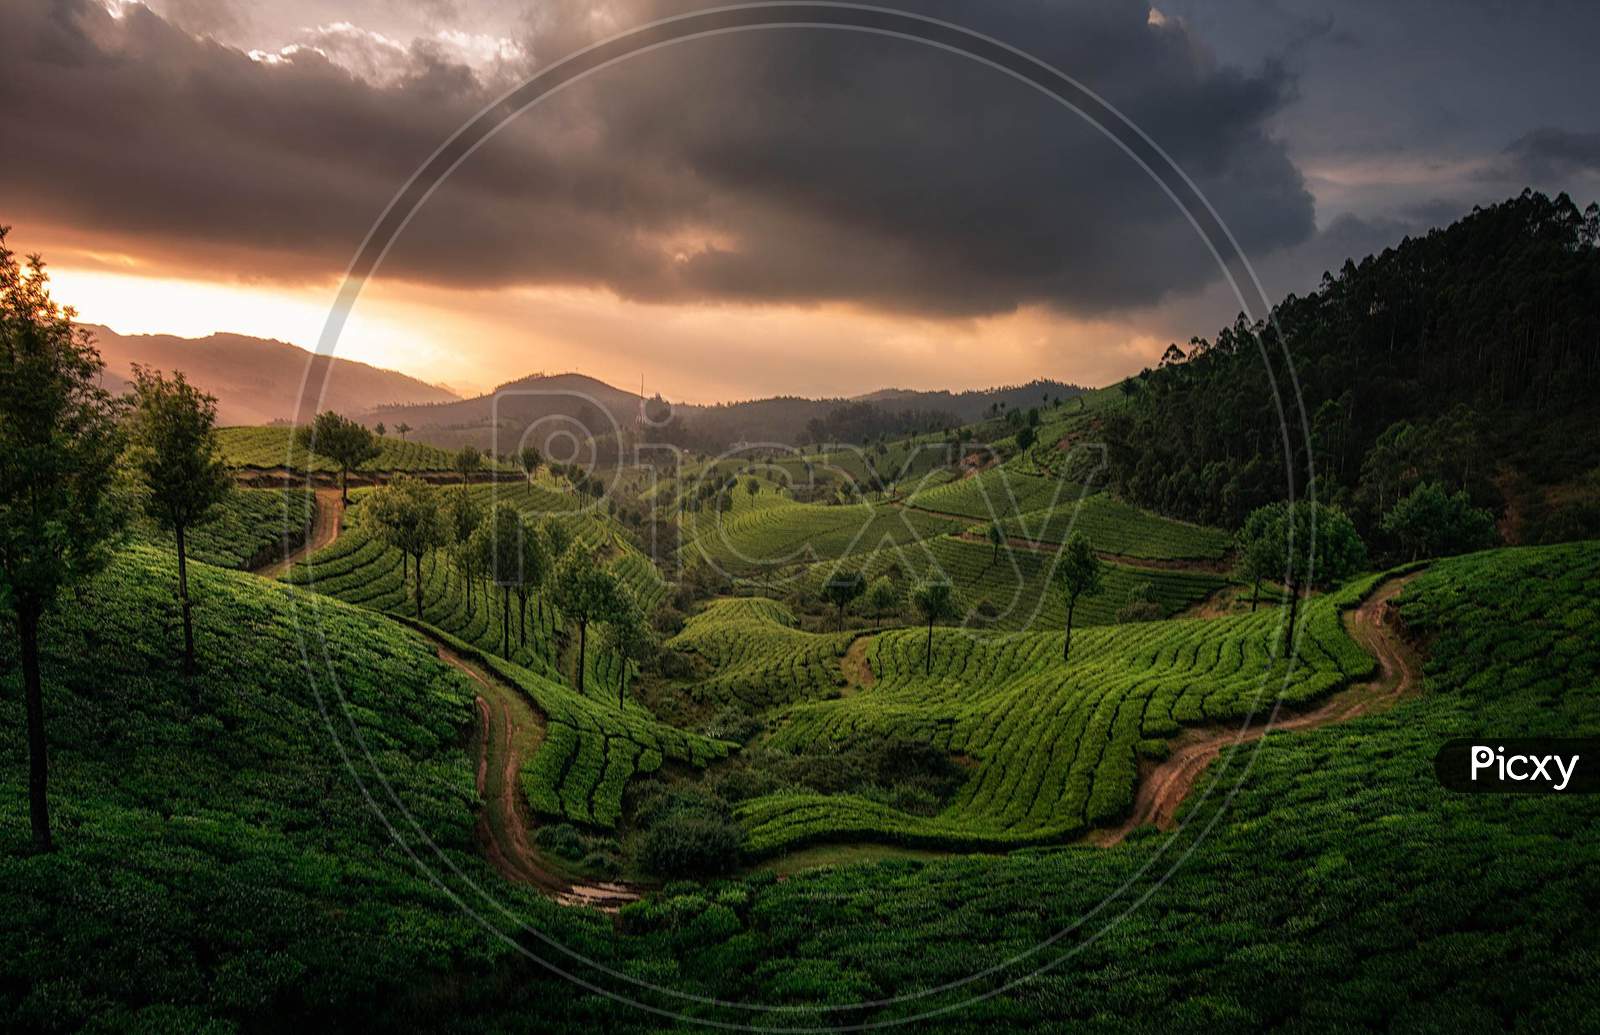 Tea Plantations In Munnar With Sunset Sky In Background